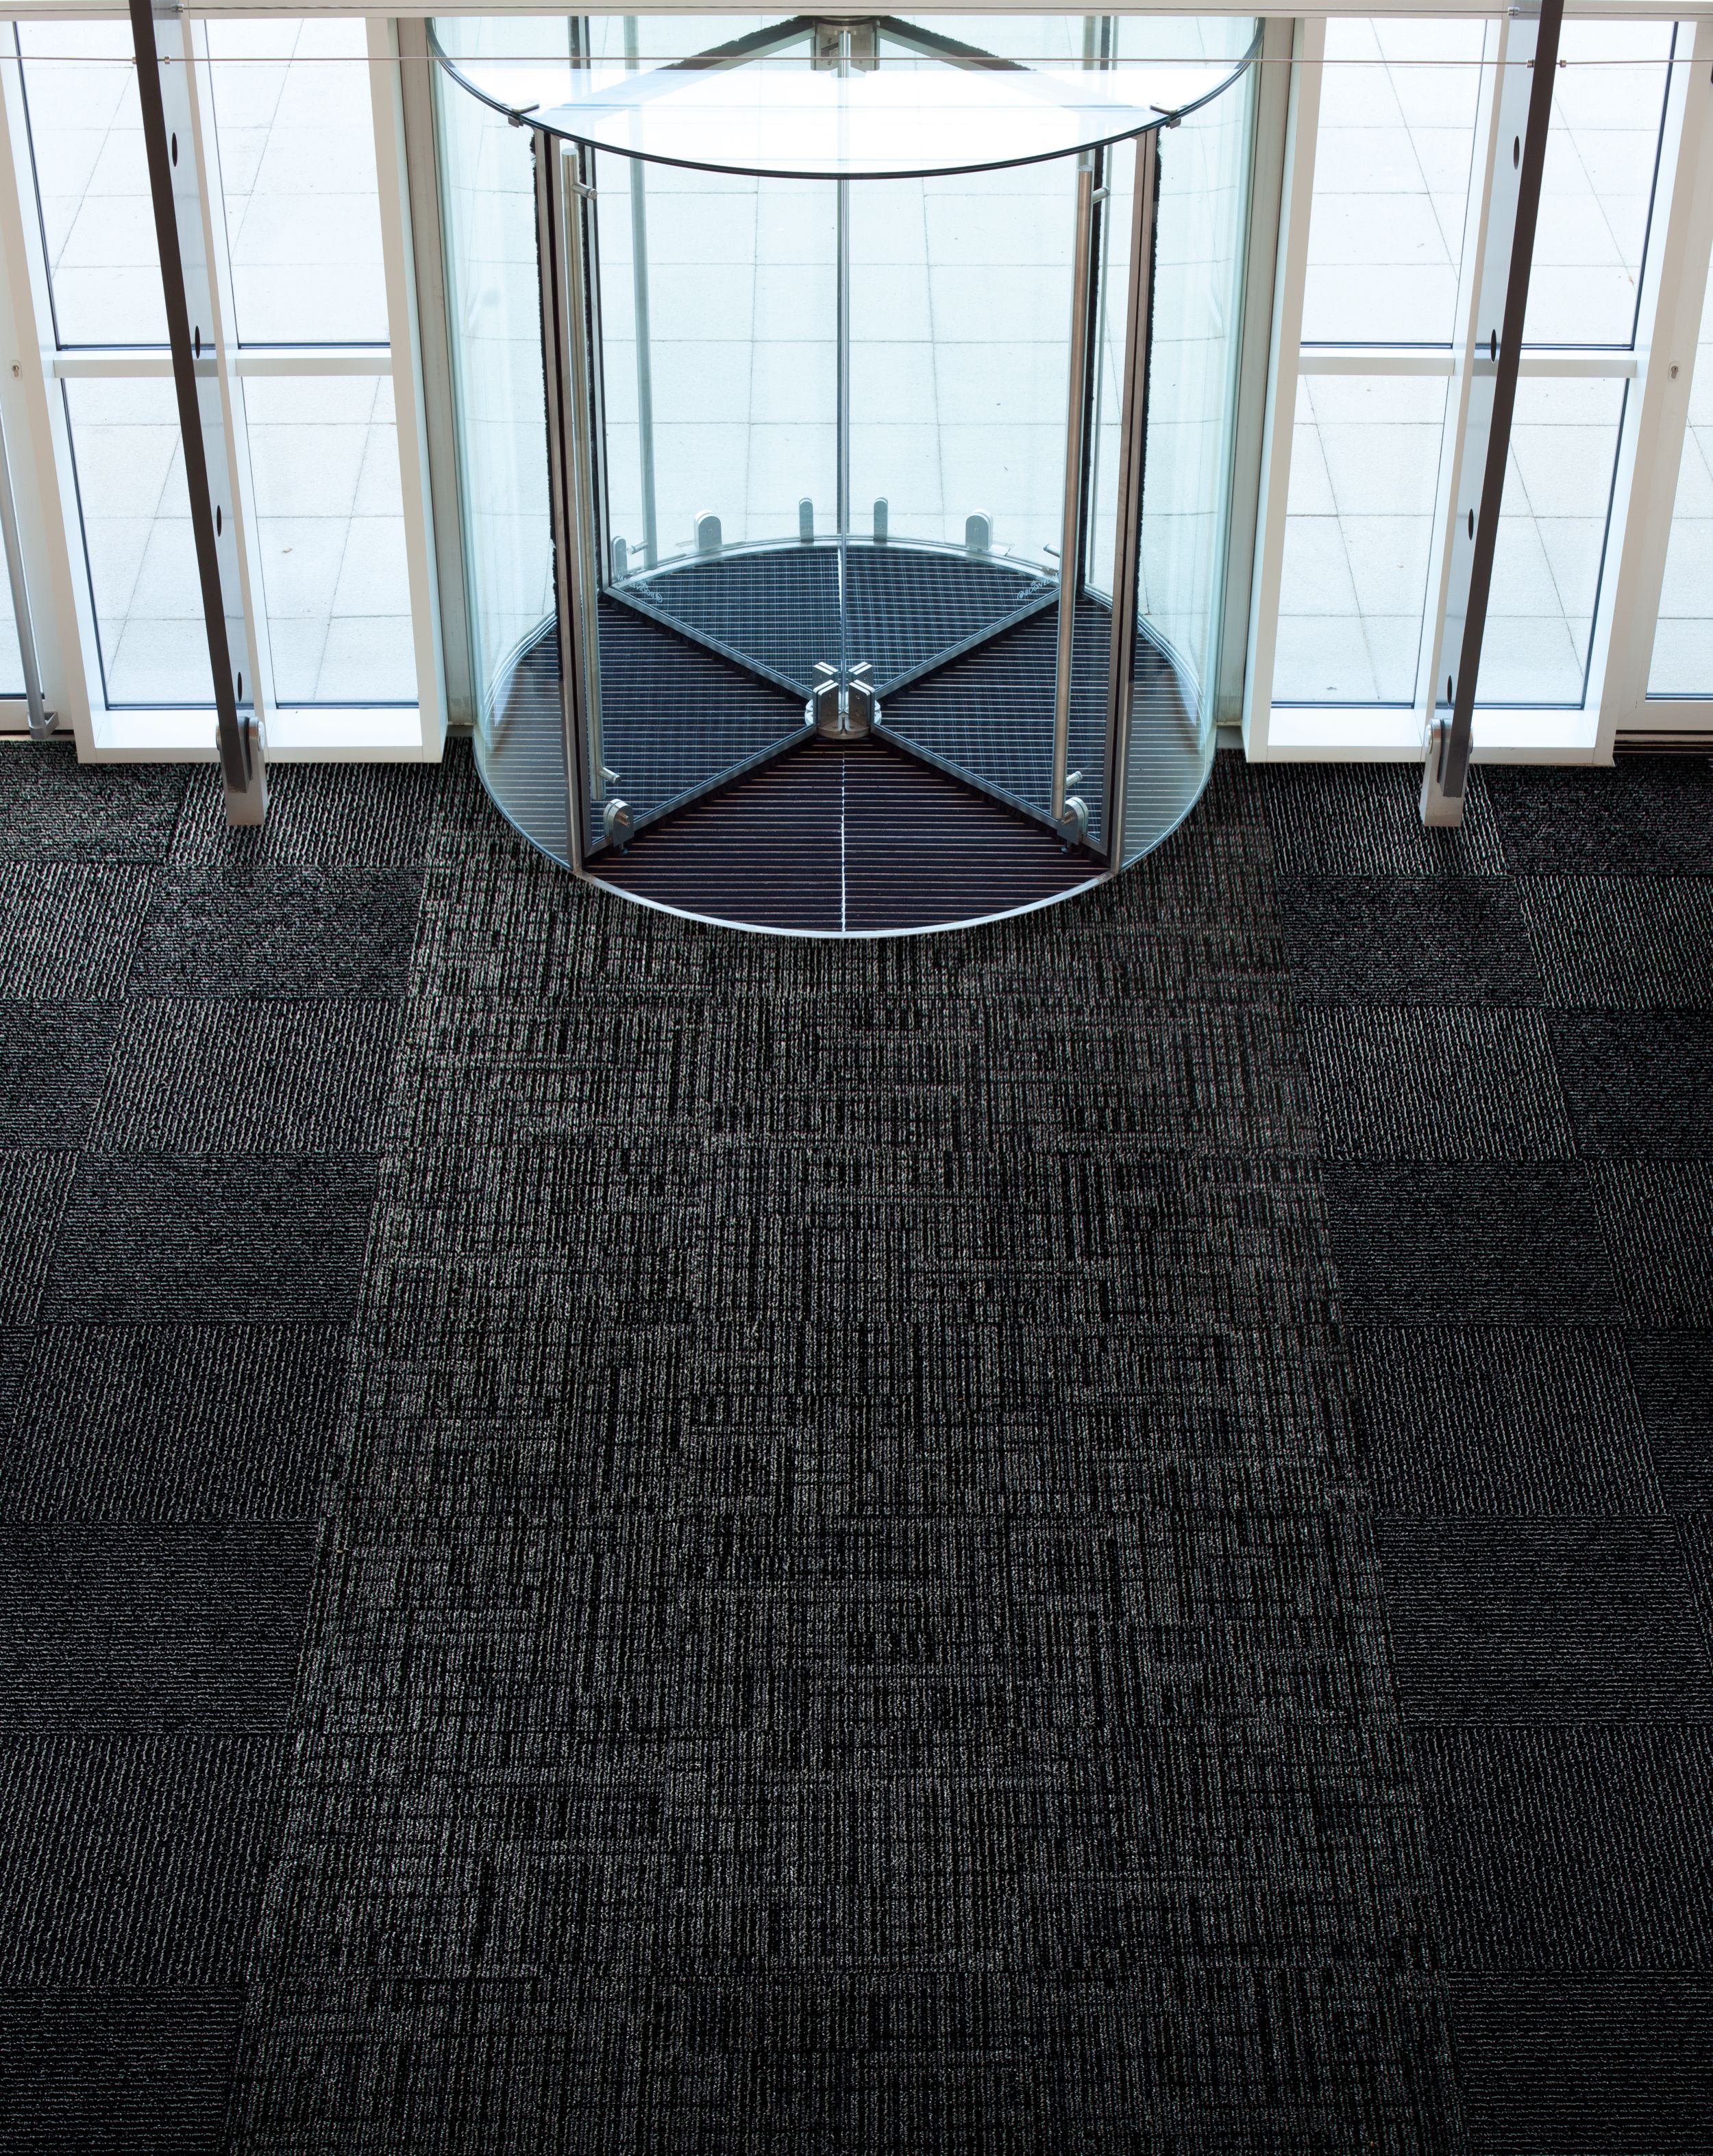 Interface SR699 and SR899 carpet tile in entryway with revolving door numéro d’image 3